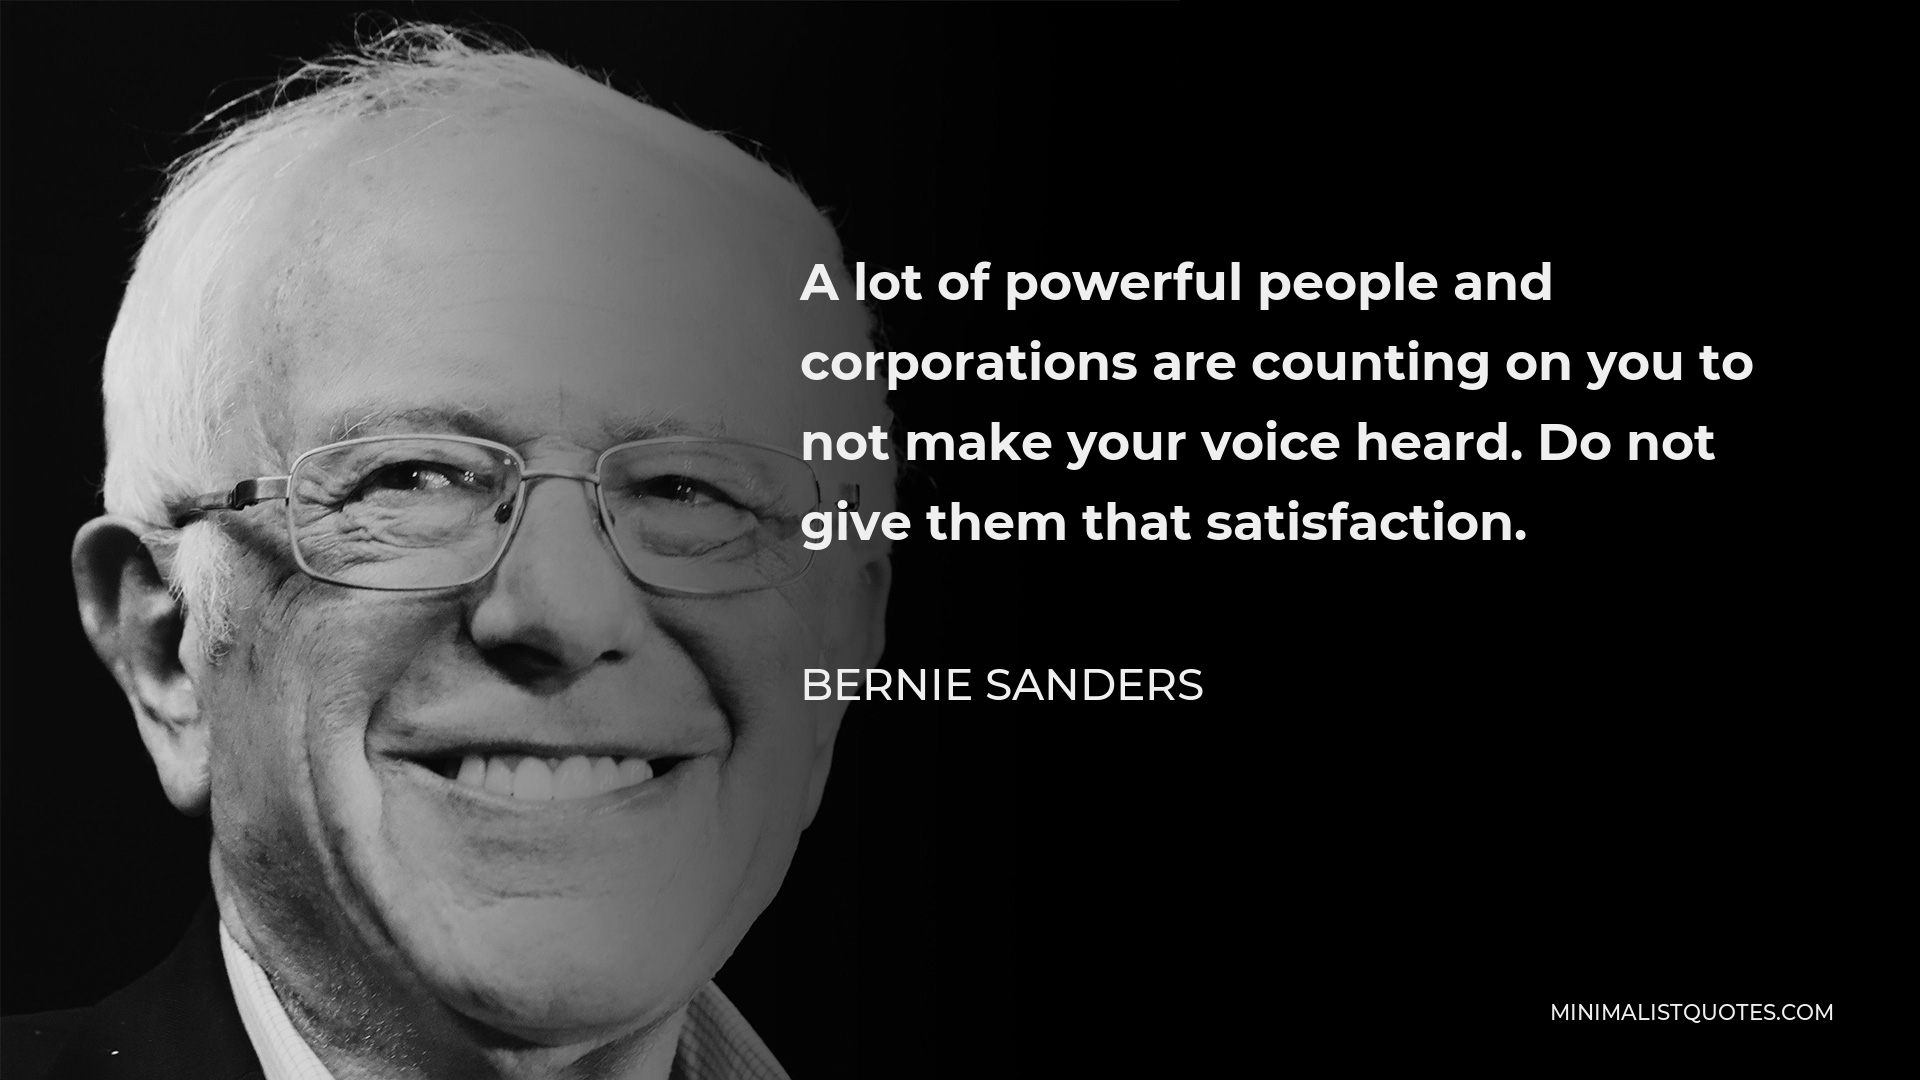 Bernie Sanders Quote - A lot of powerful people and corporations are counting on you to not make your voice heard. Do not give them that satisfaction.